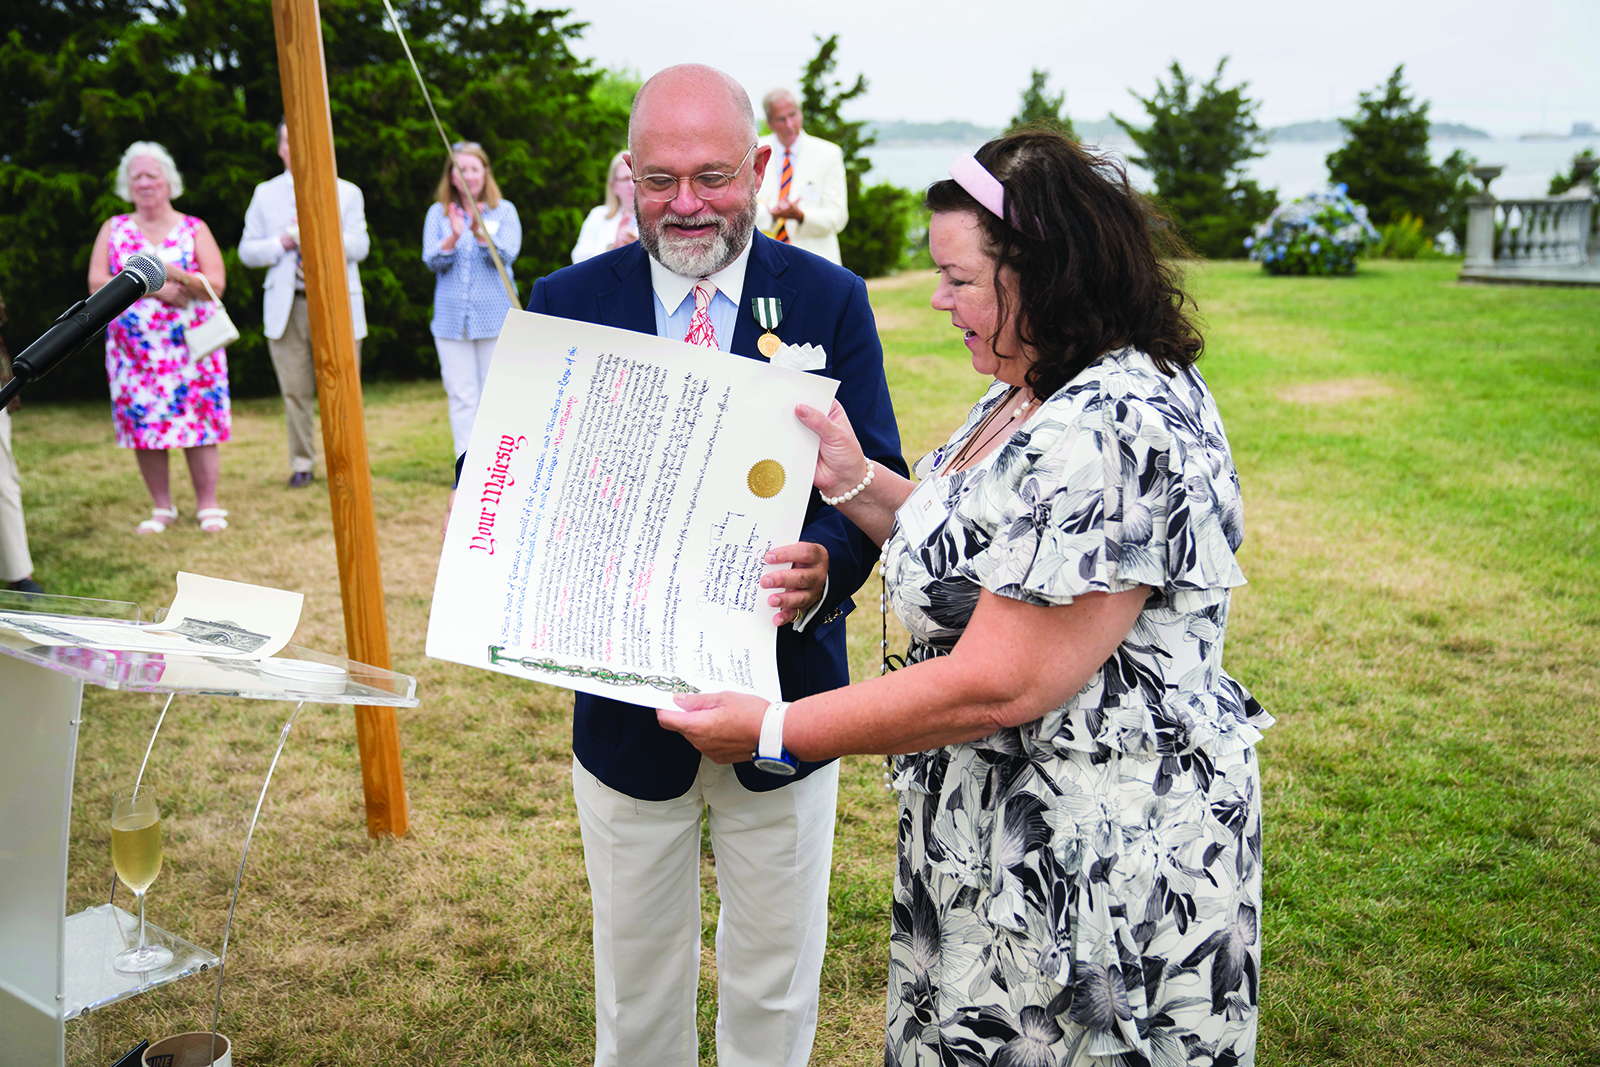 Simons presenting UK Ambassador Dame Karen Pierce with a proclamation of congratulations “in honor of a glorious and historic reign” to HM The Queen for the Platinum Jubilee, July 2022